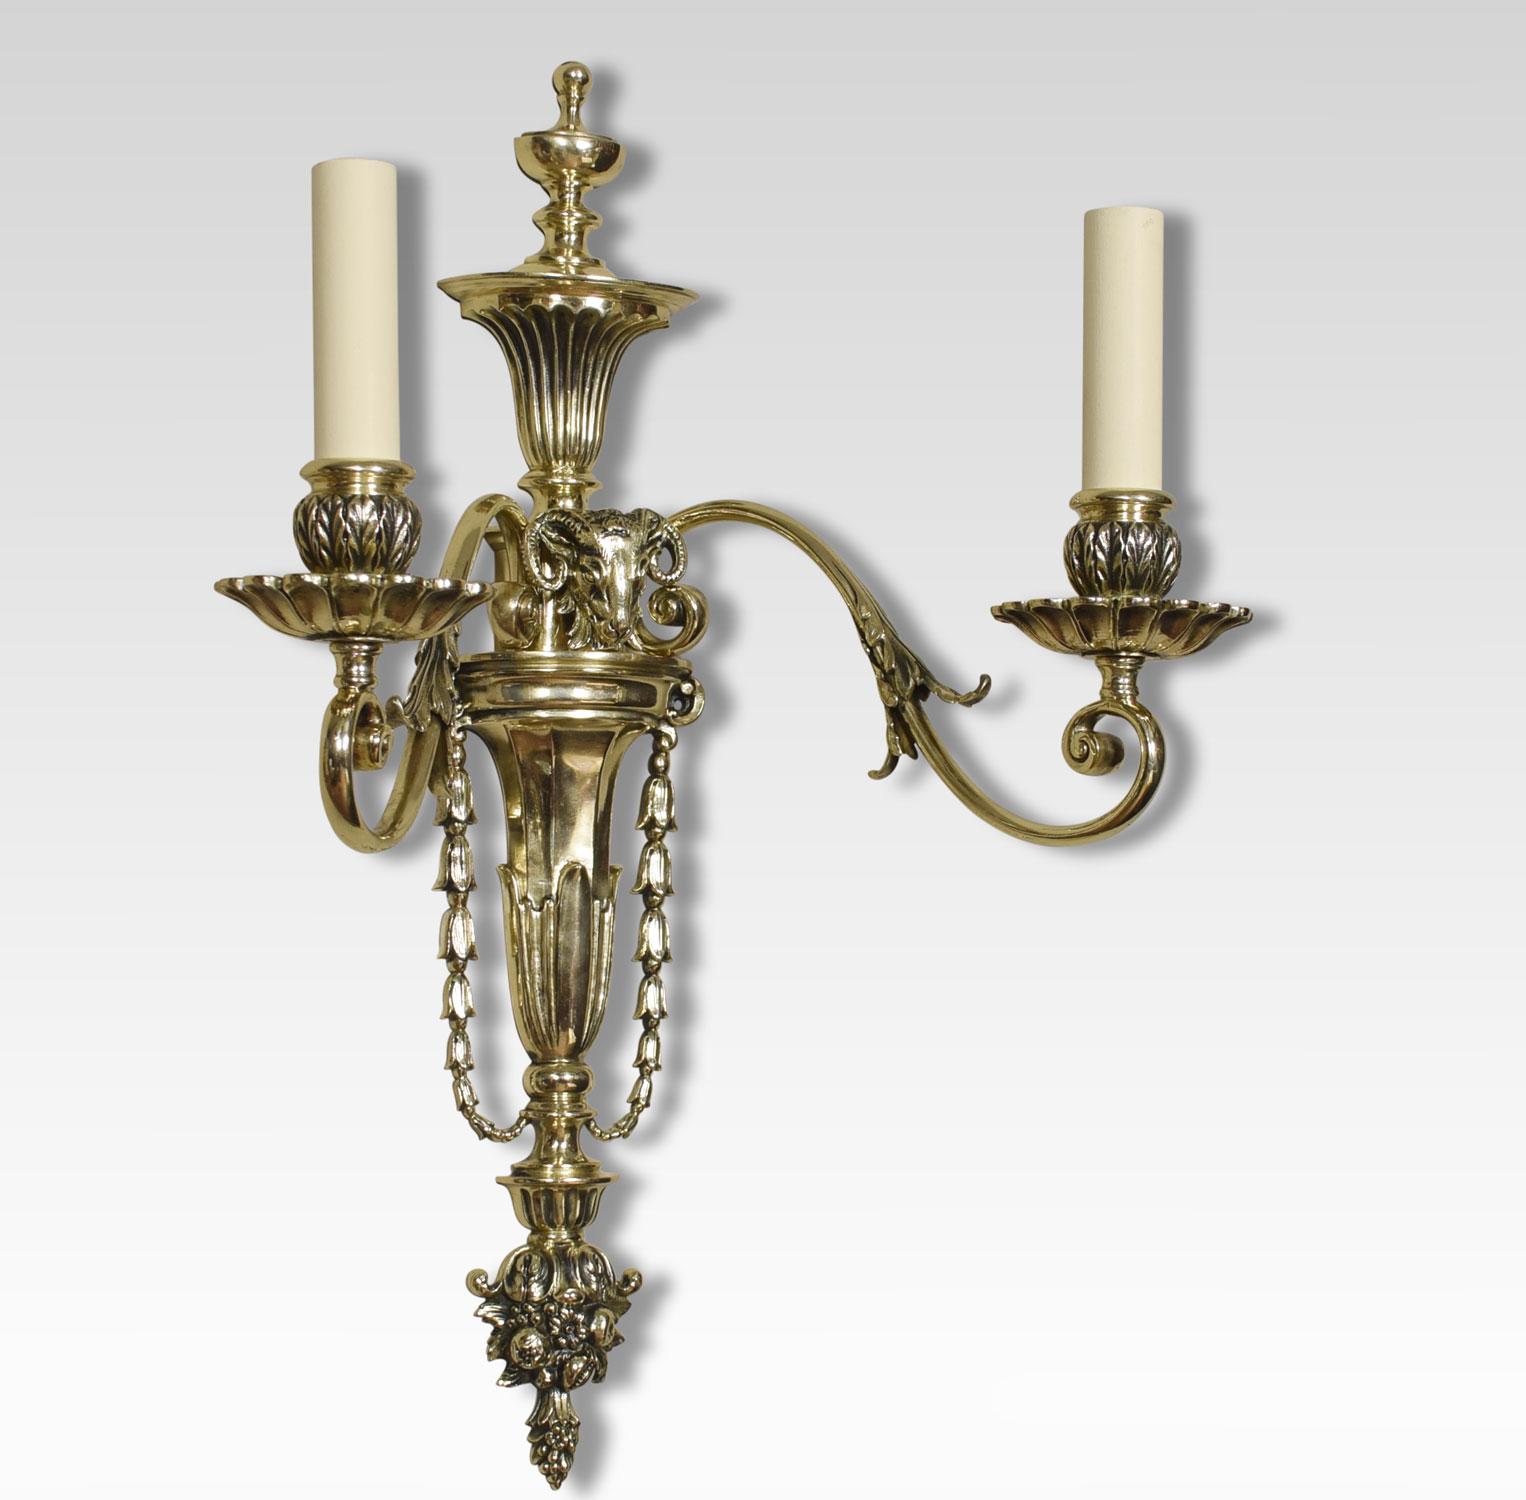 Pair of late 19th century French gilt metal wall lights the leaf scrolling arms having circular drip pans and sconces. Issuing from tapering back plate. The ornate finial above rams headed centre. The wall lights have been converted for